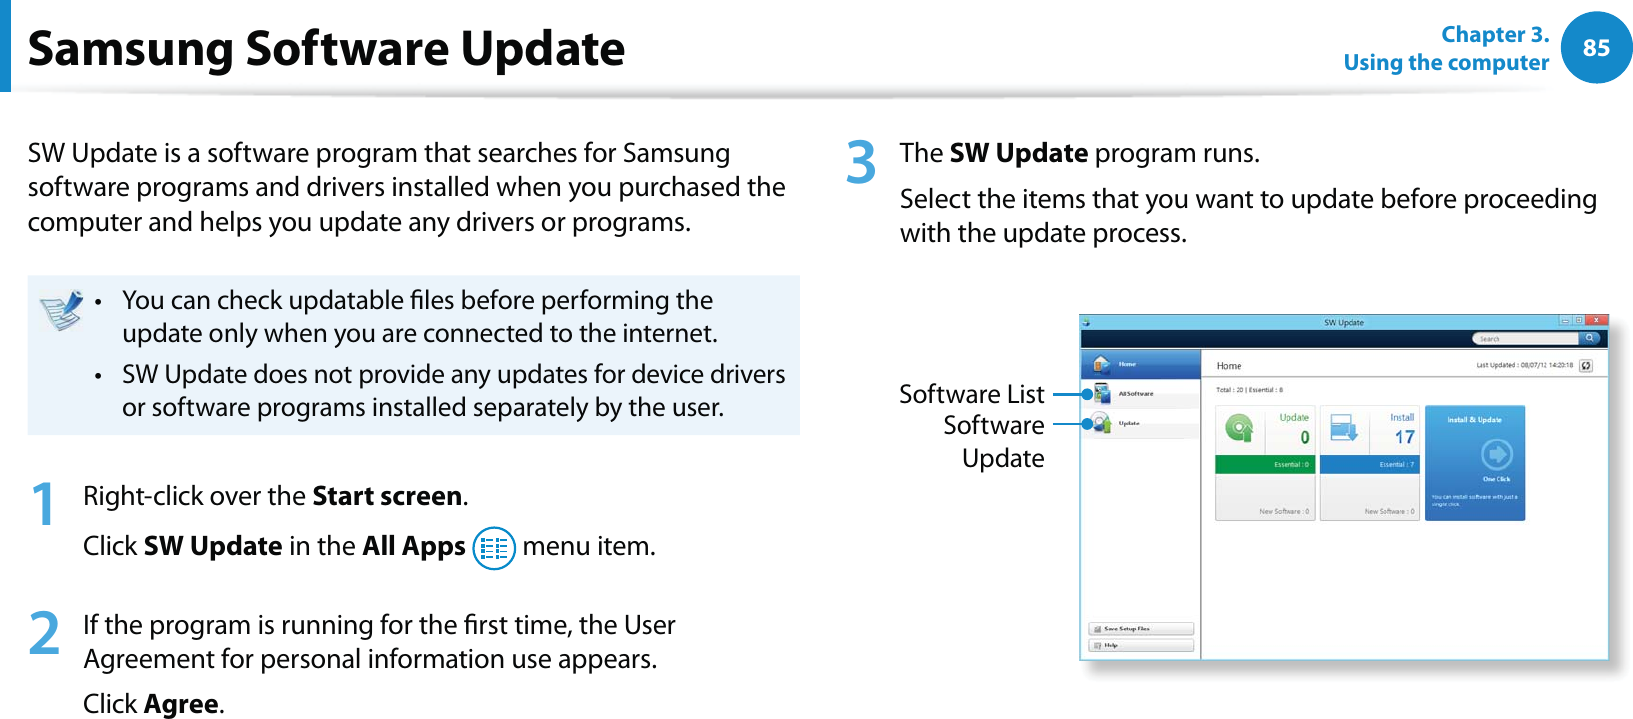 85Chapter 3.  Using the computerSamsung Software UpdateSW Update is a software program that searches for Samsung software programs and drivers installed when you purchased the computer and helps you update any drivers or programs.You can check updatable les before performing the t update only when you are connected to the internet.SW Update does not provide any updates for device drivers t or software programs installed separately by the user.1  Right-click over the Start screen.Click SW Update in the All Apps  menu item.2  If the program is running for the rst time, the User Agreement for personal information use appears. Click Agree.3 The SW Update program runs. Select the items that you want to update before proceeding with the update process.Software UpdateSoftware List